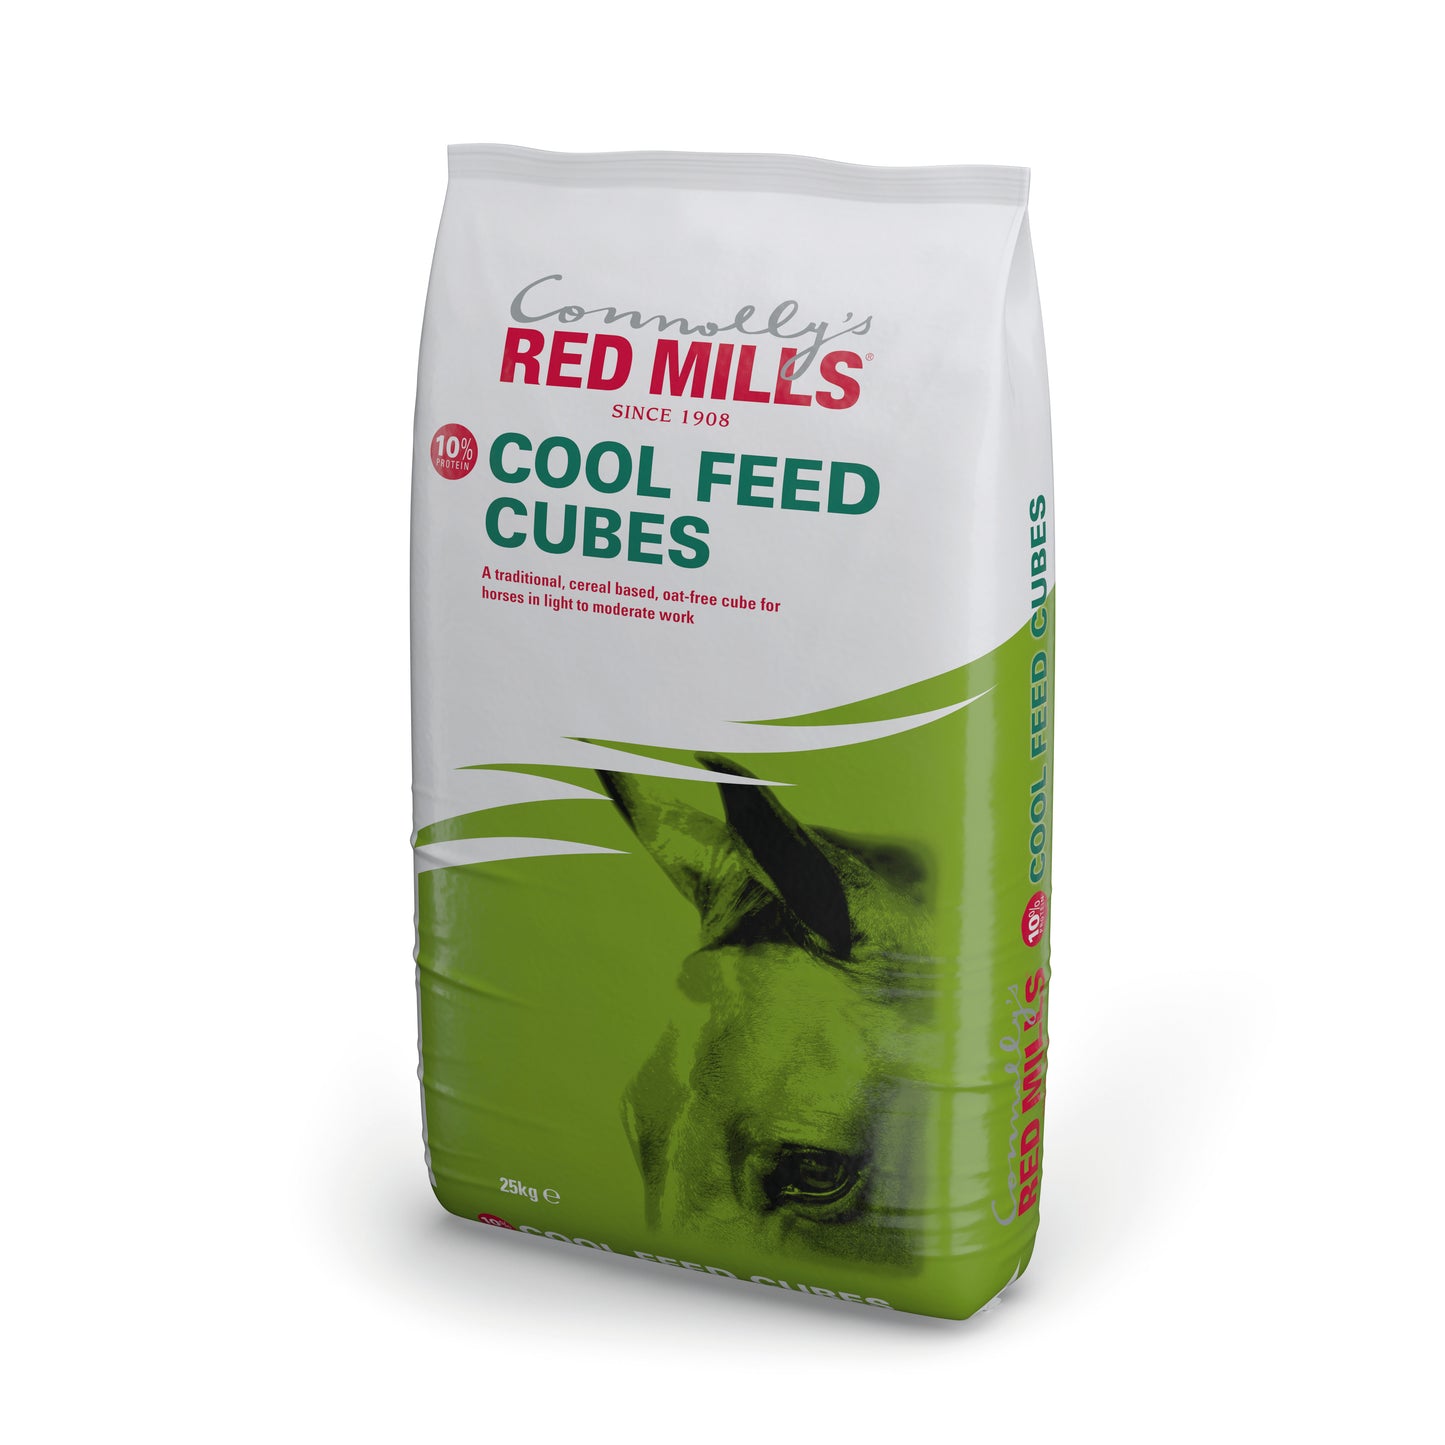 Red Mills Cool Feed Cubes